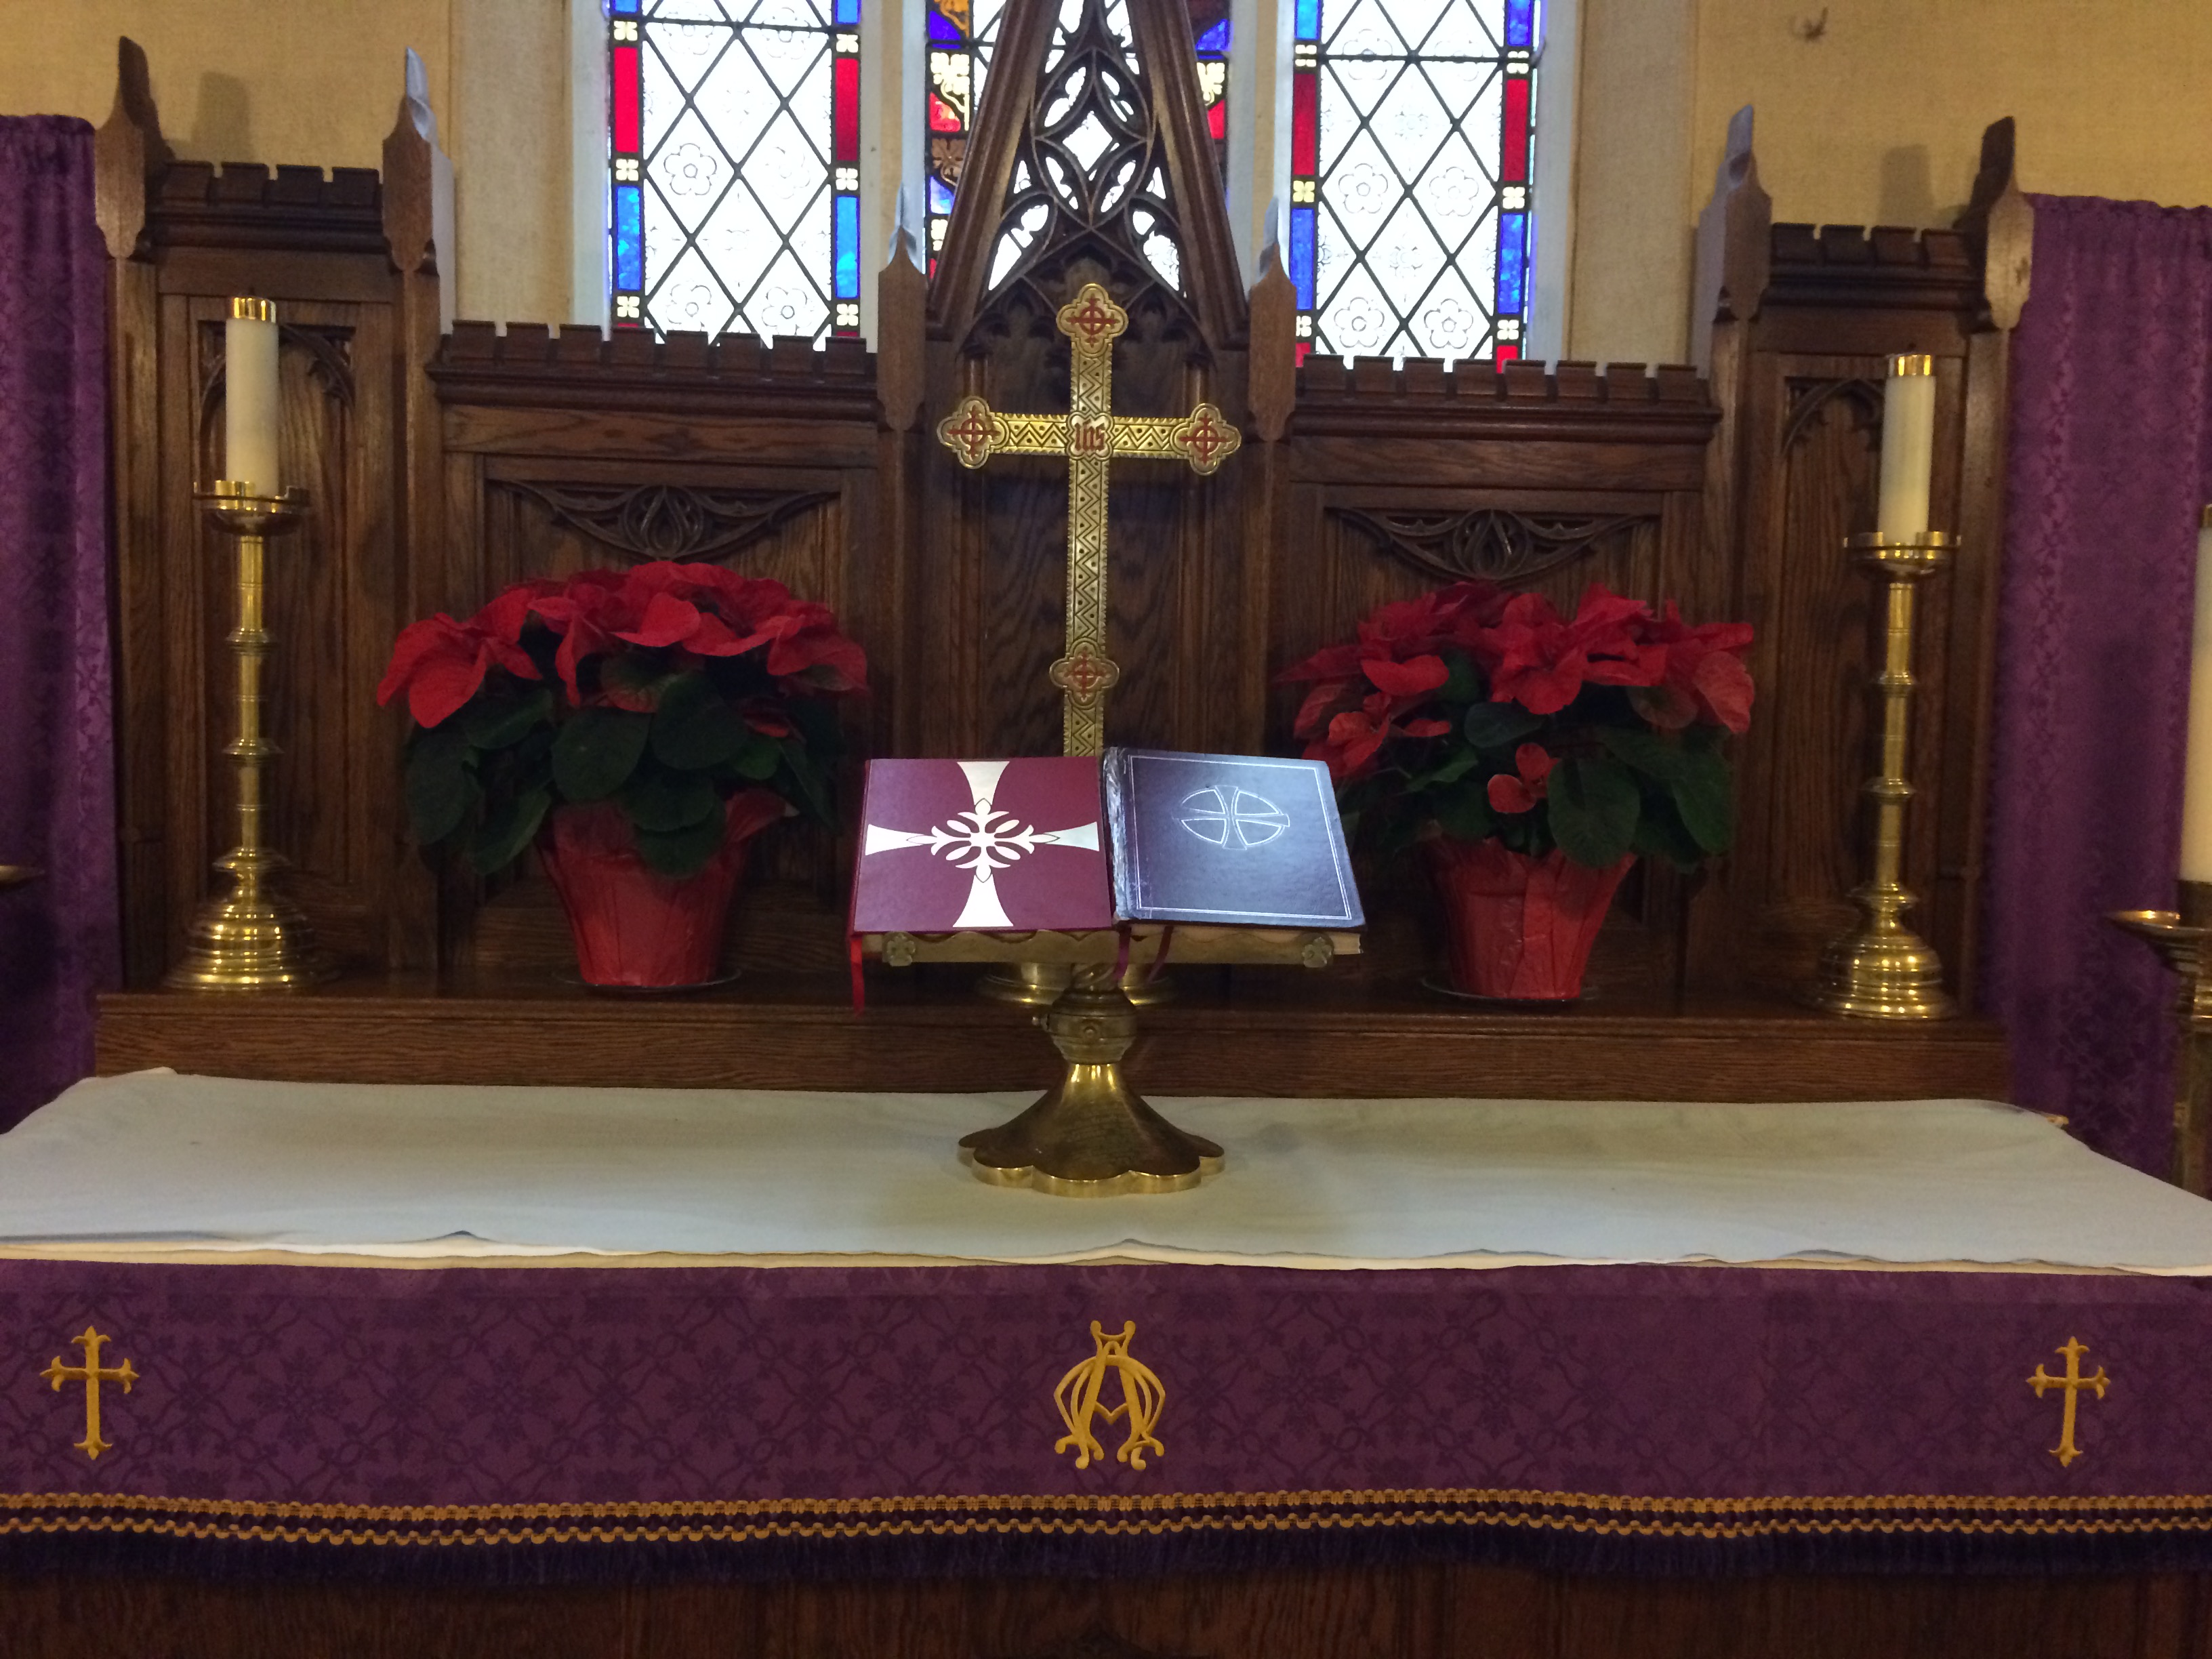 Sunday, December 24th at St. Luke's: Altar Flowers are in memory of Dorothea Cavanaugh and Betty Norwood from their families.